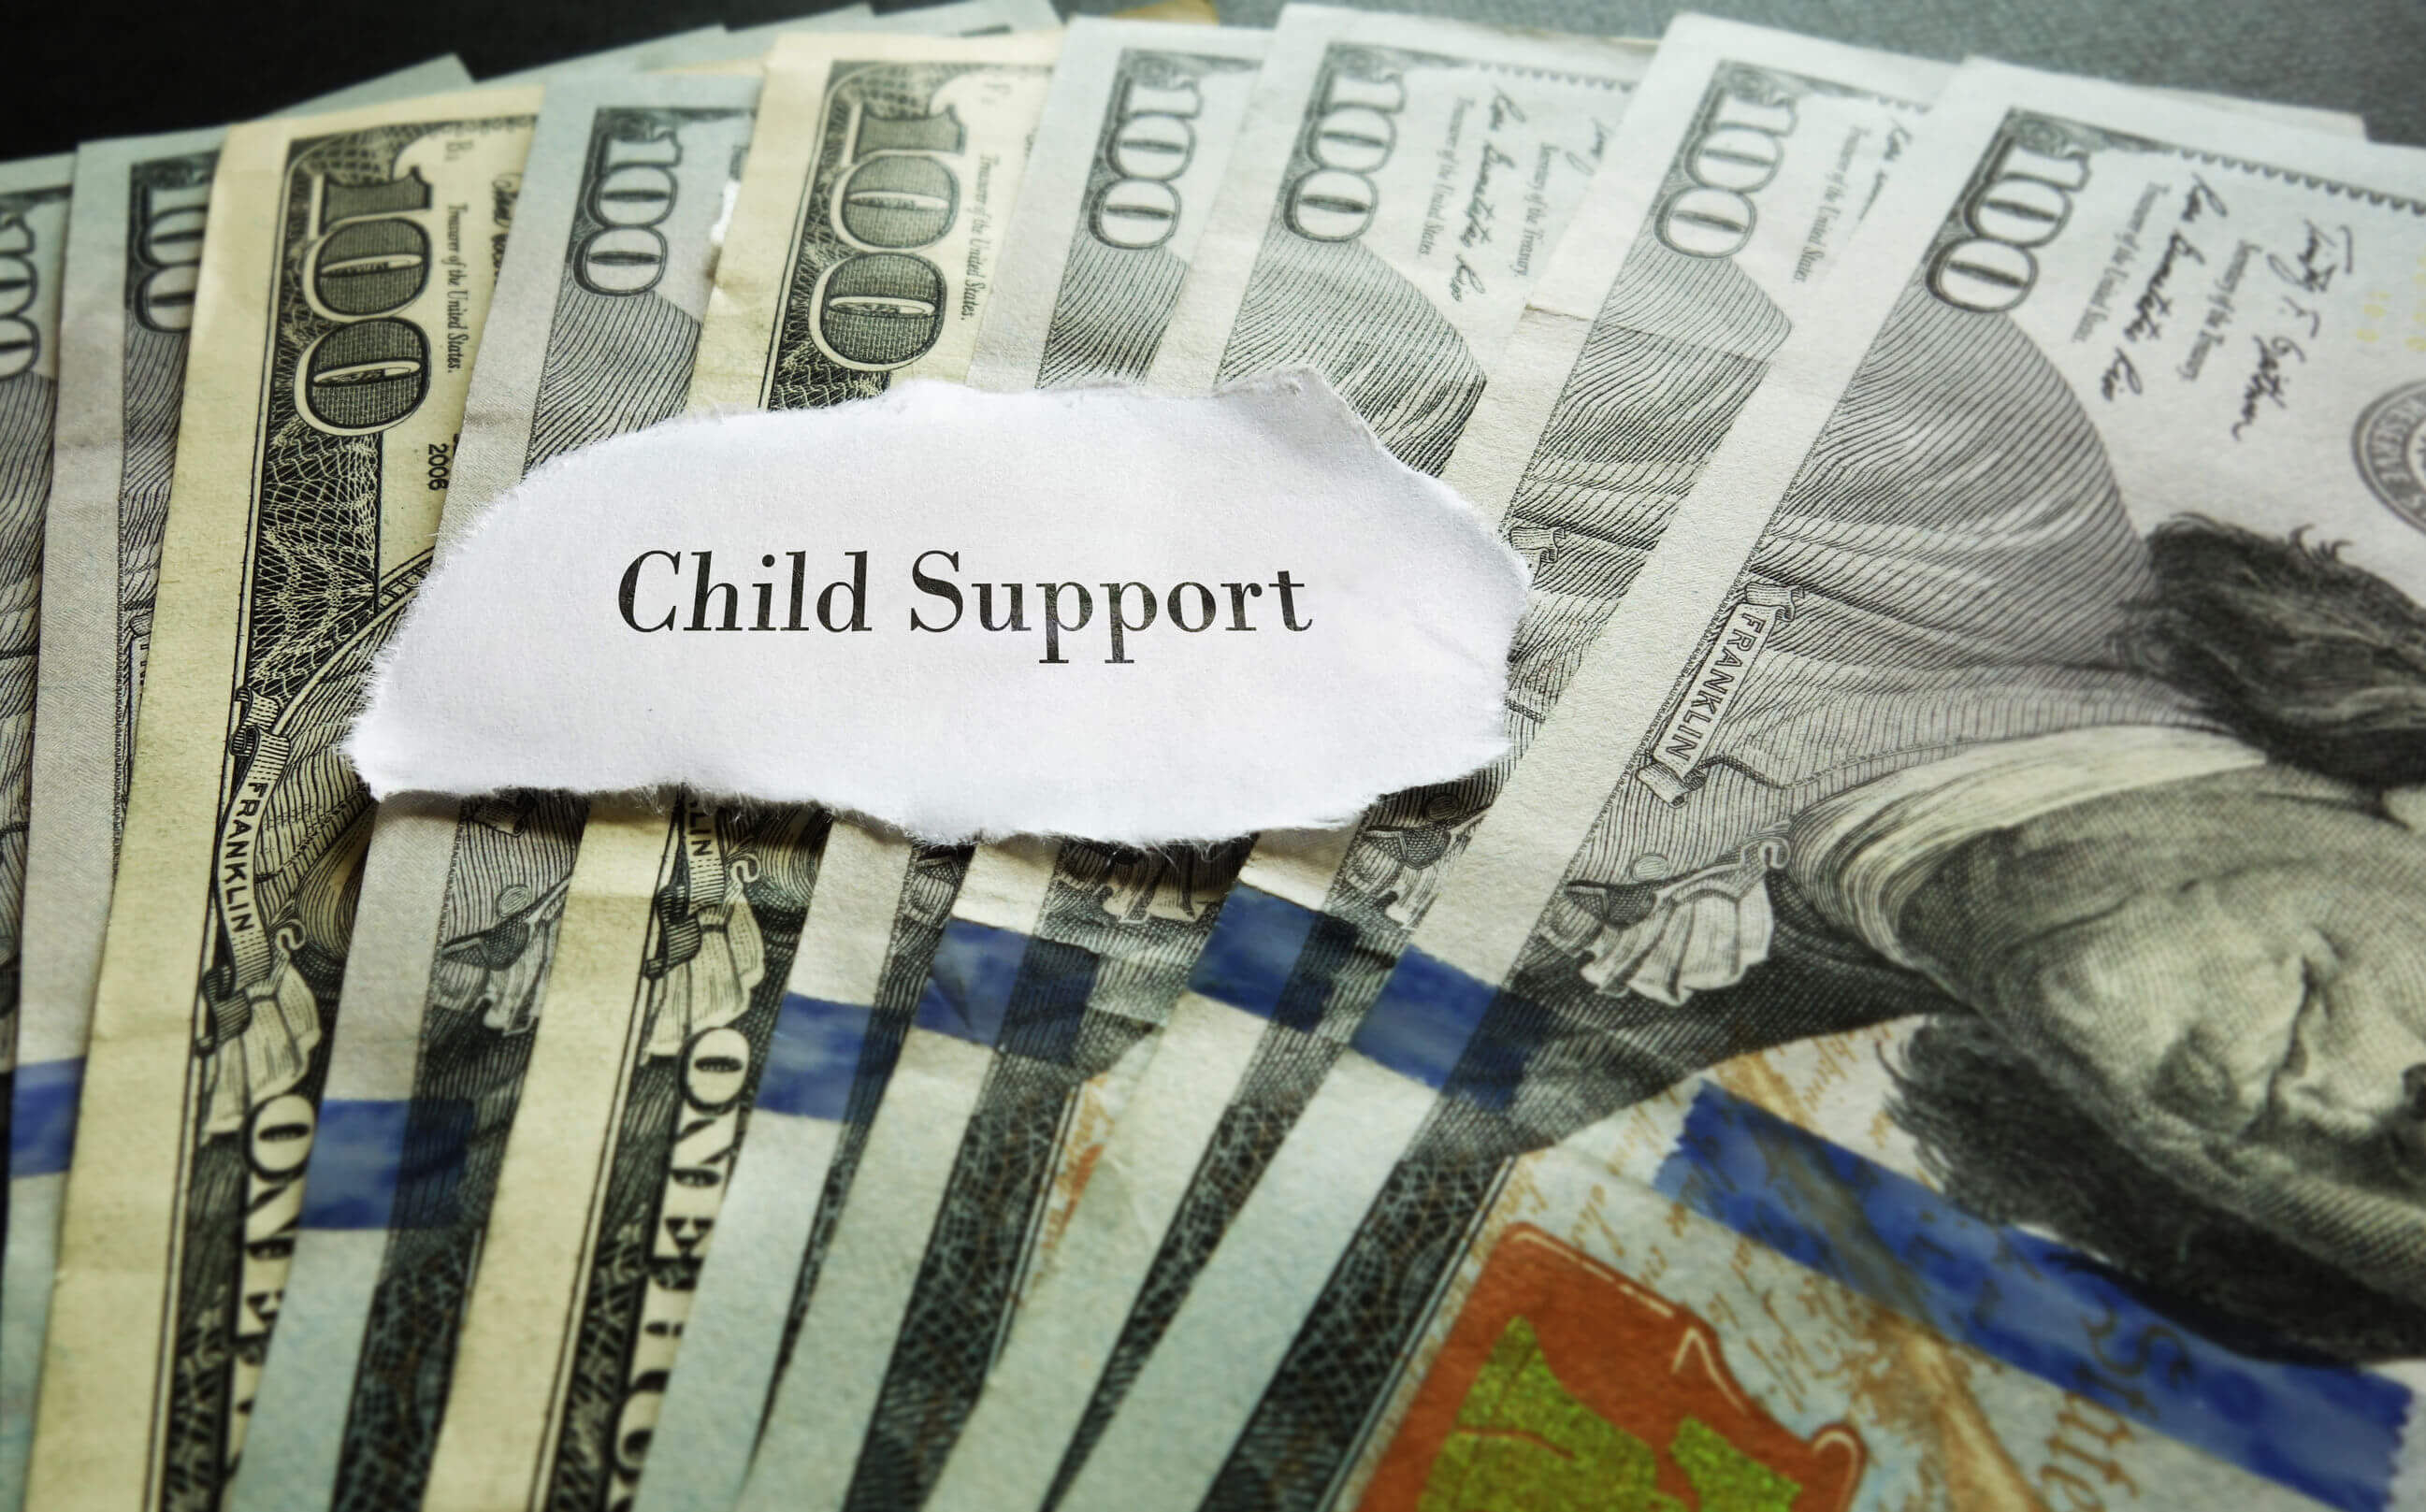 child support law - how to enforce child support